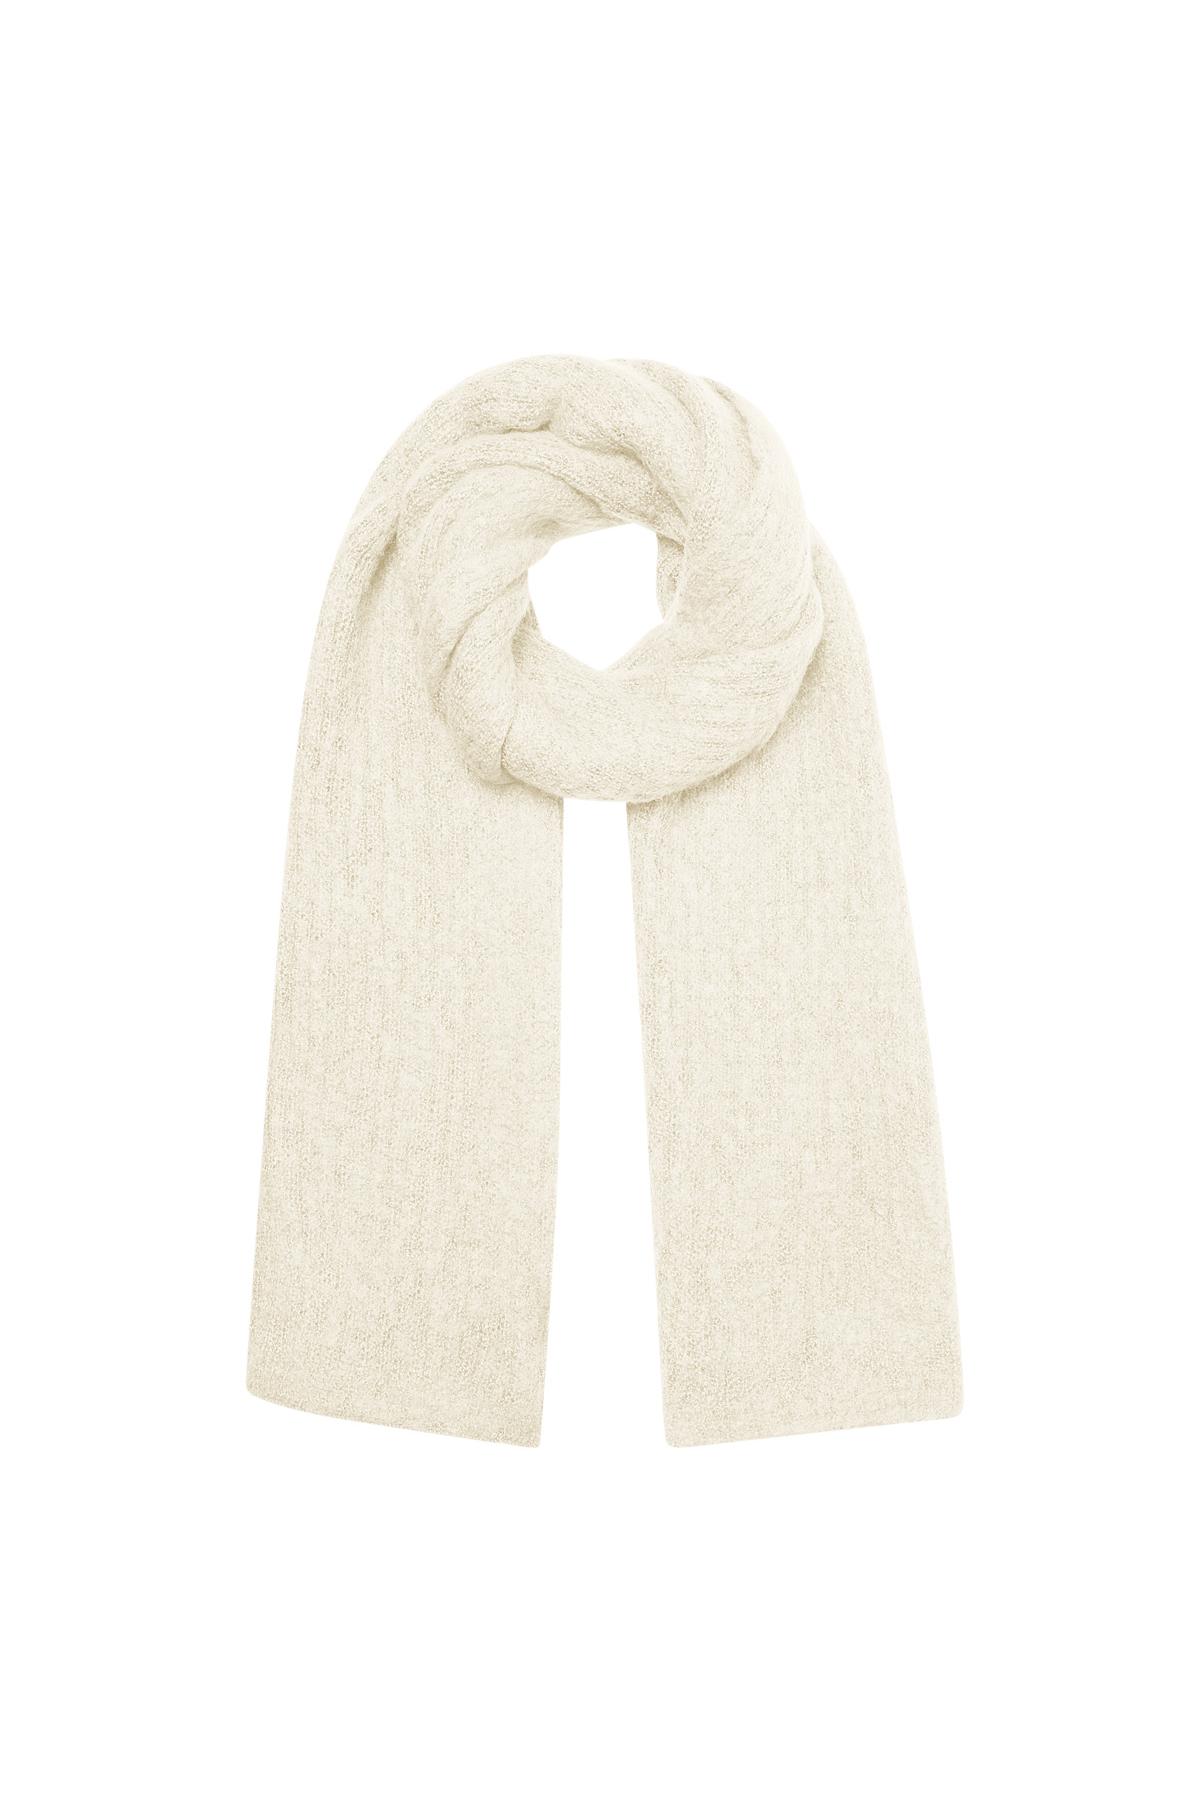 Scarf knitted plain - white 